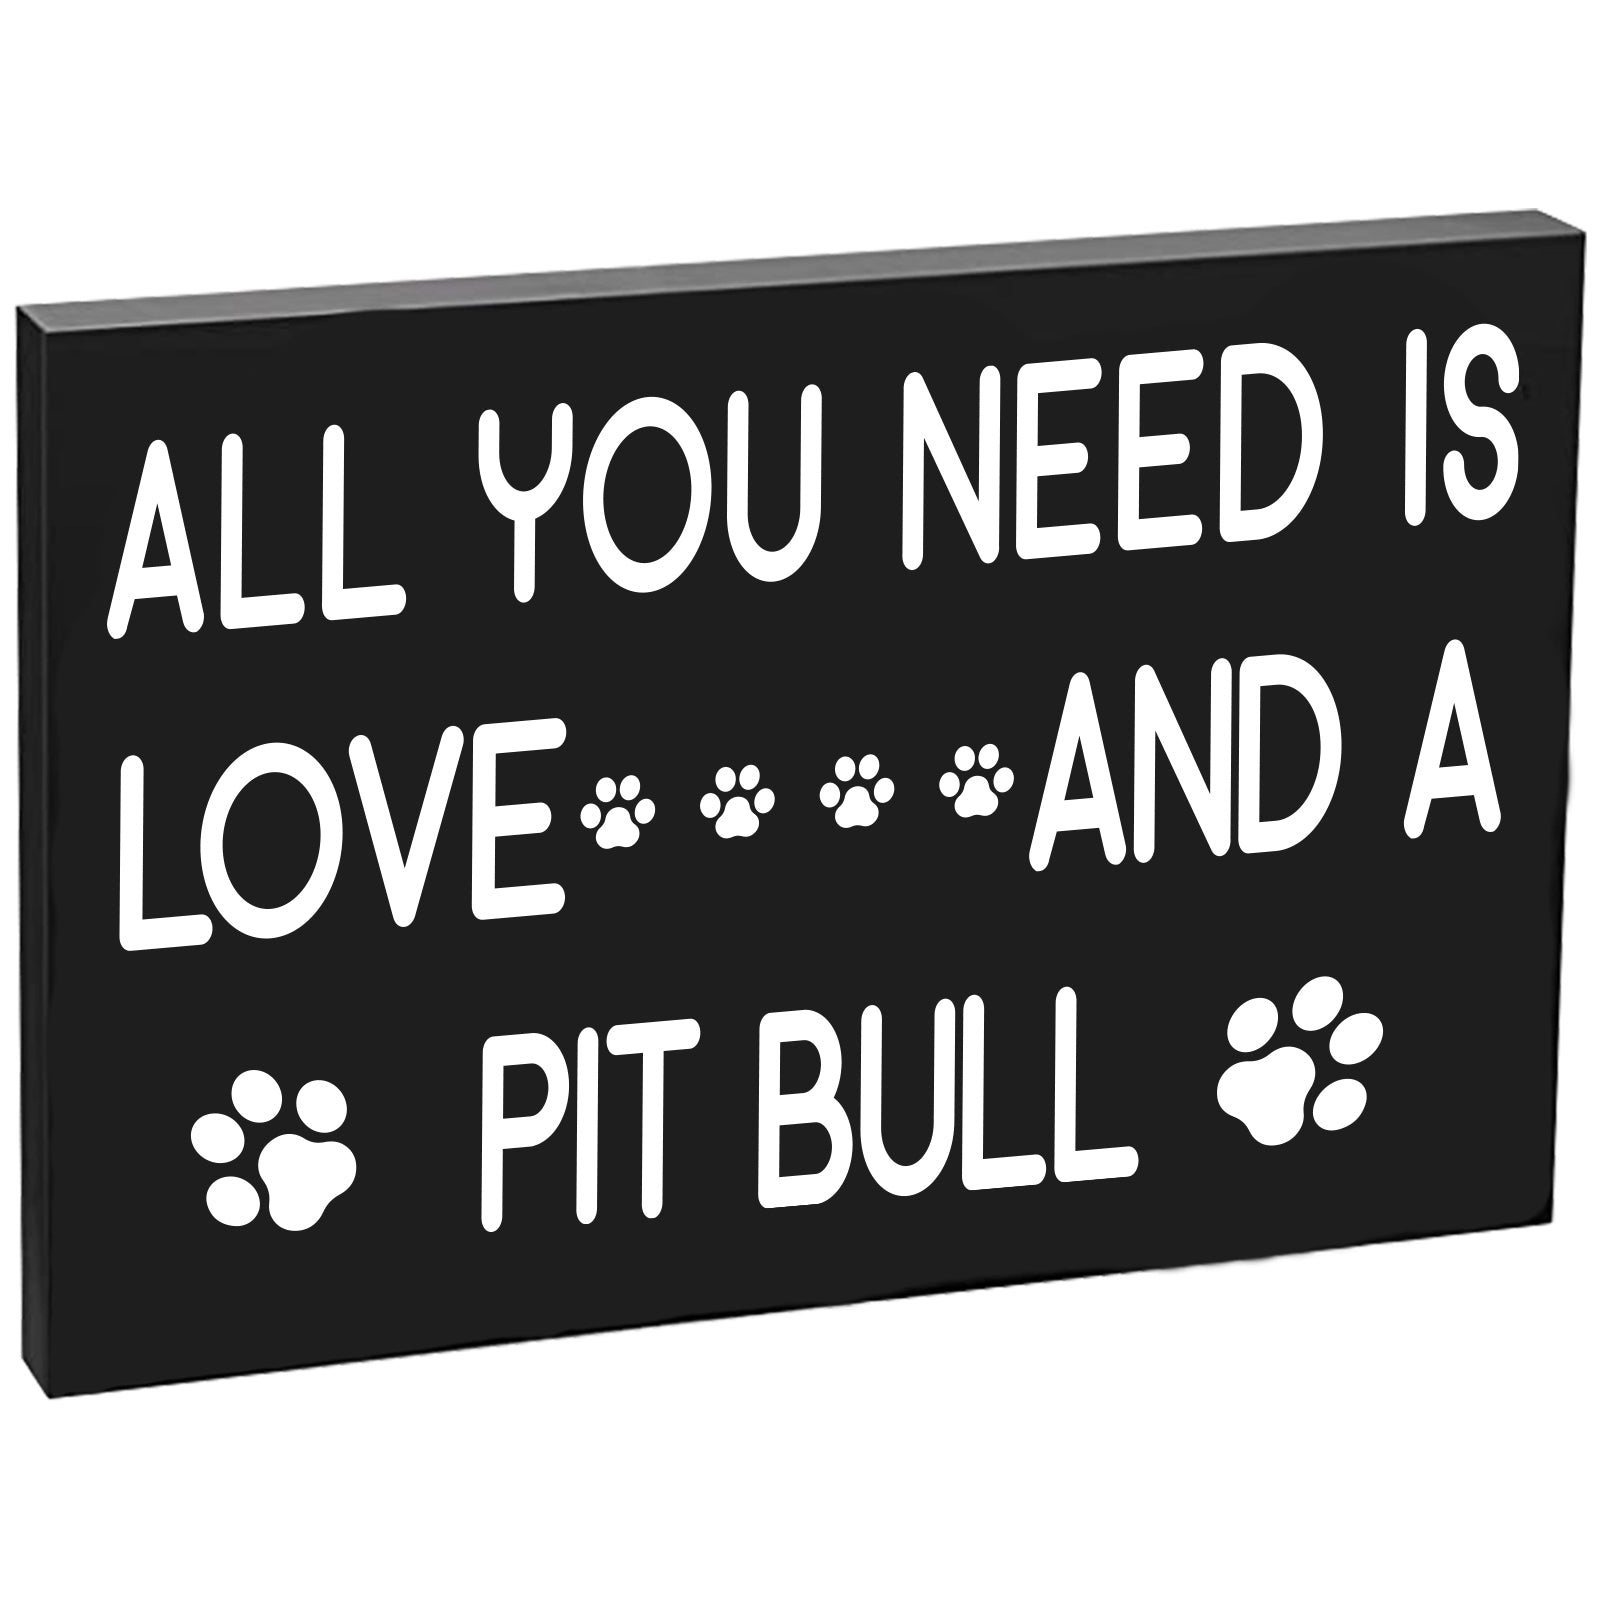 Funny Pit Bull Signs